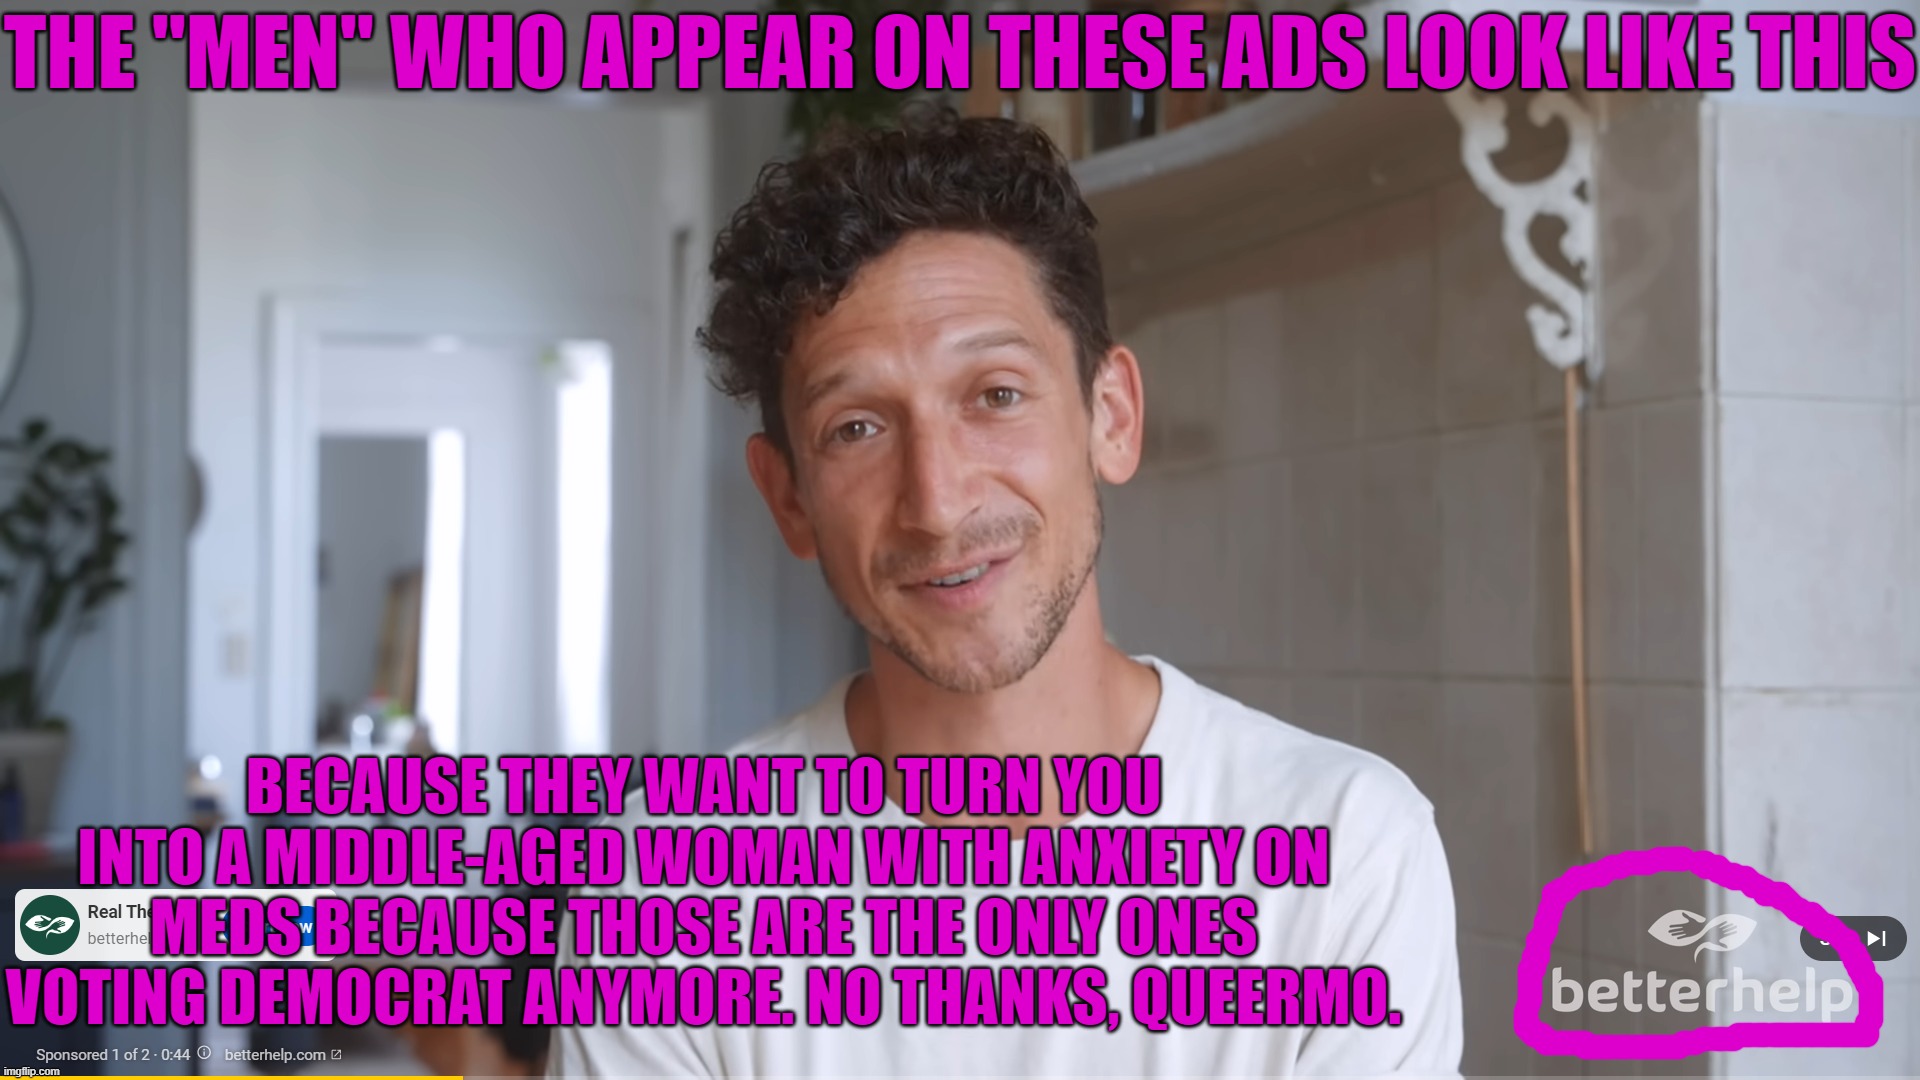 Therapy Will Turn You Into This | THE "MEN" WHO APPEAR ON THESE ADS LOOK LIKE THIS; BECAUSE THEY WANT TO TURN YOU INTO A MIDDLE-AGED WOMAN WITH ANXIETY ON MEDS BECAUSE THOSE ARE THE ONLY ONES VOTING DEMOCRAT ANYMORE. NO THANKS, QUEERMO. | image tagged in therapy,democrats,pussies | made w/ Imgflip meme maker